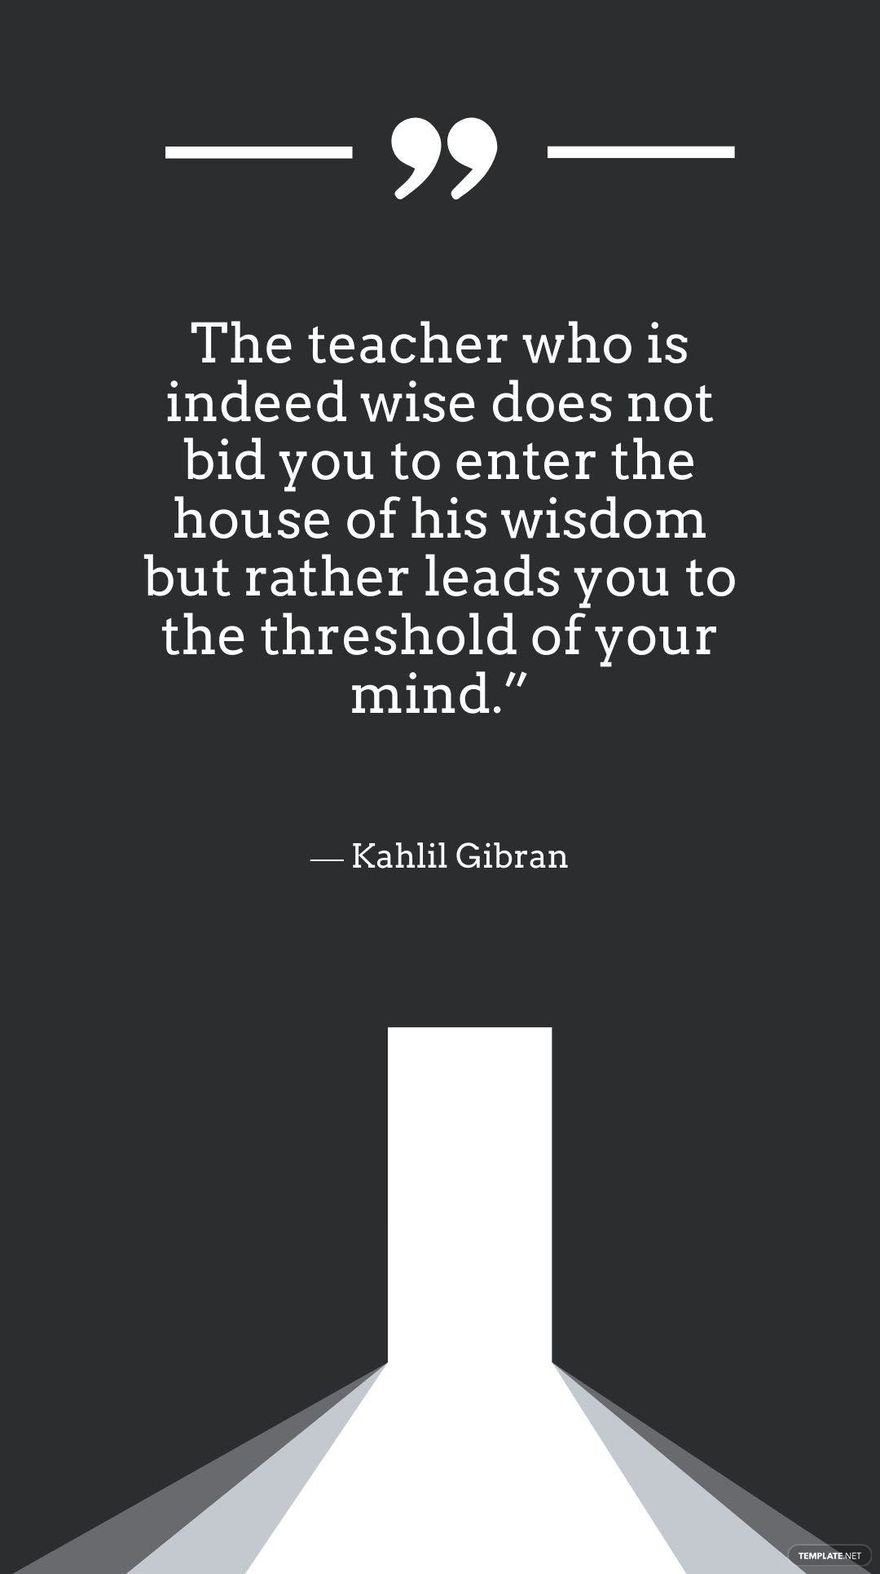 Kahlil Gibran - The teacher who is indeed wise does not bid you to enter the house of his wisdom but rather leads you to the threshold of your mind.